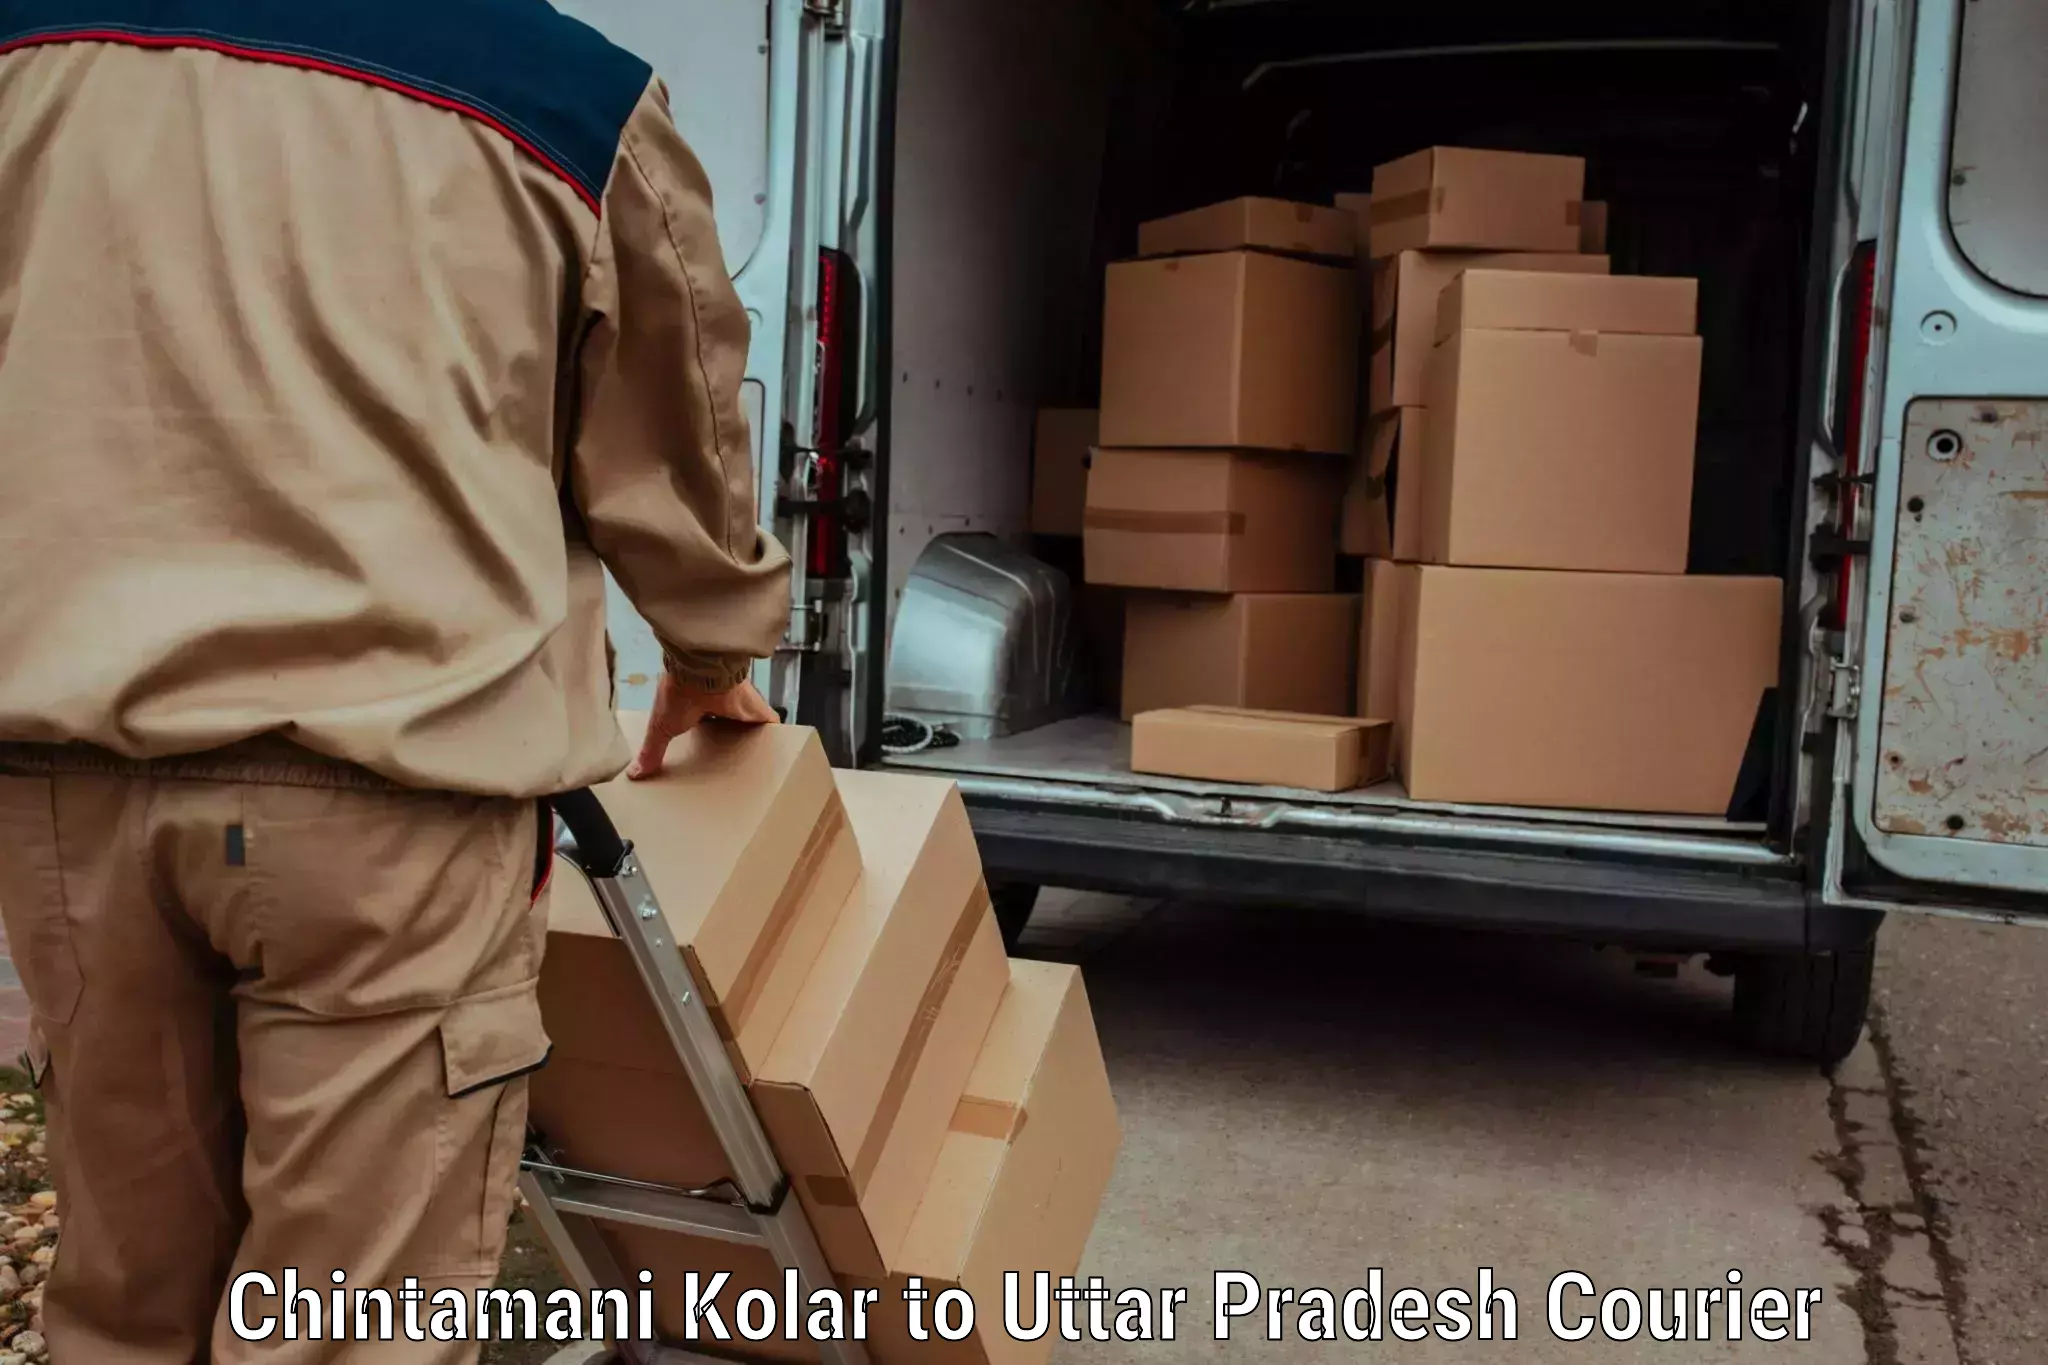 User-friendly delivery service in Chintamani Kolar to Aligarh